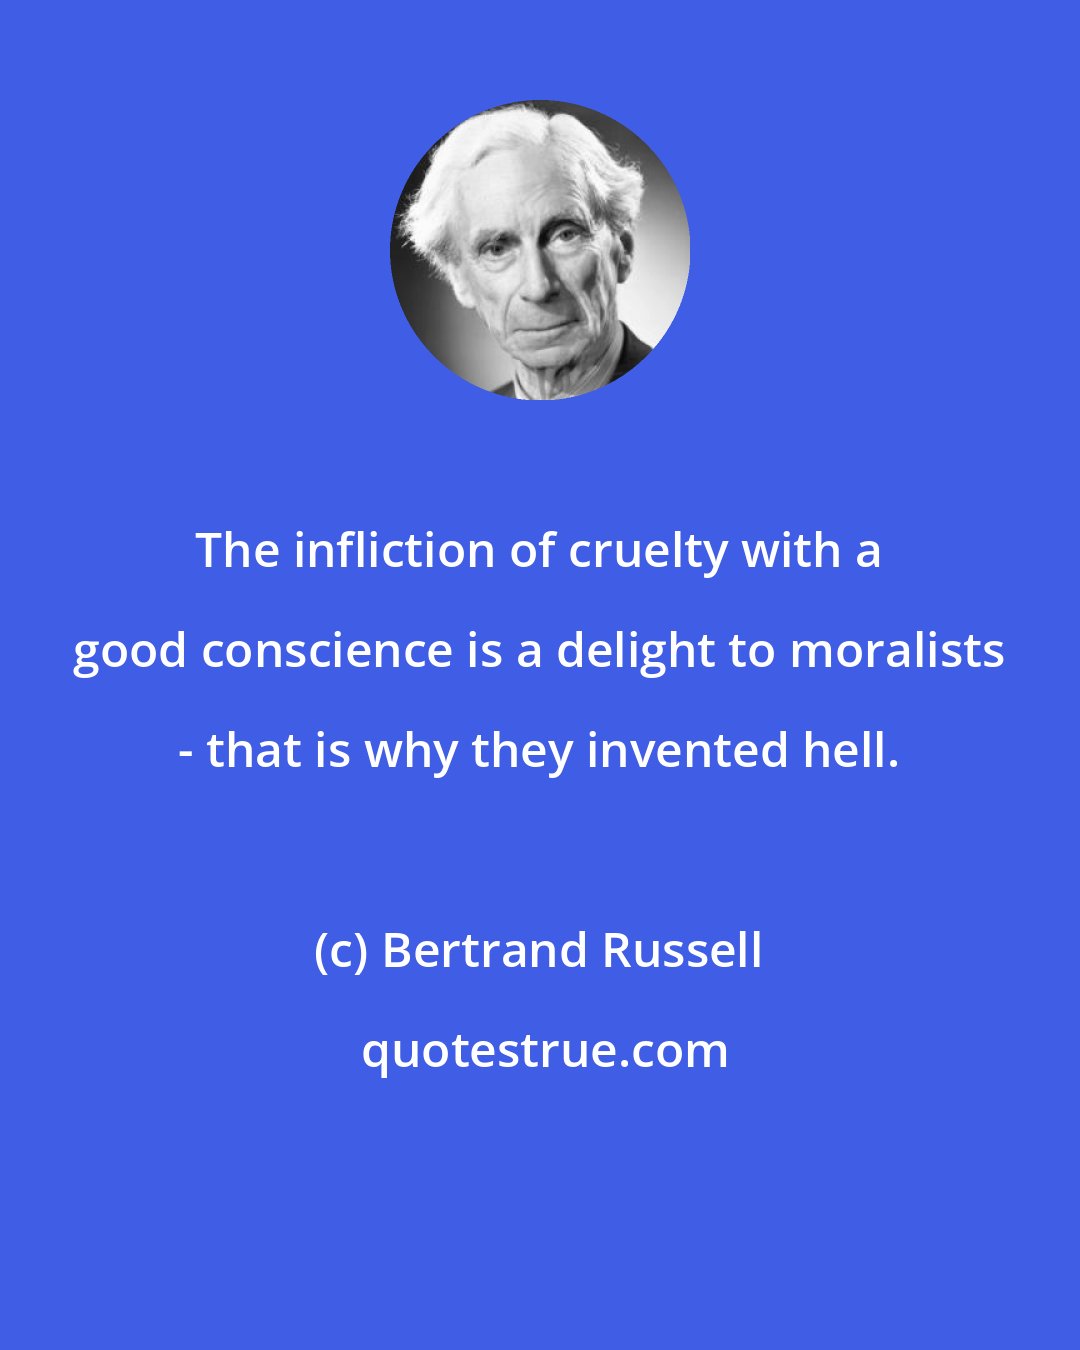 Bertrand Russell: The infliction of cruelty with a good conscience is a delight to moralists - that is why they invented hell.